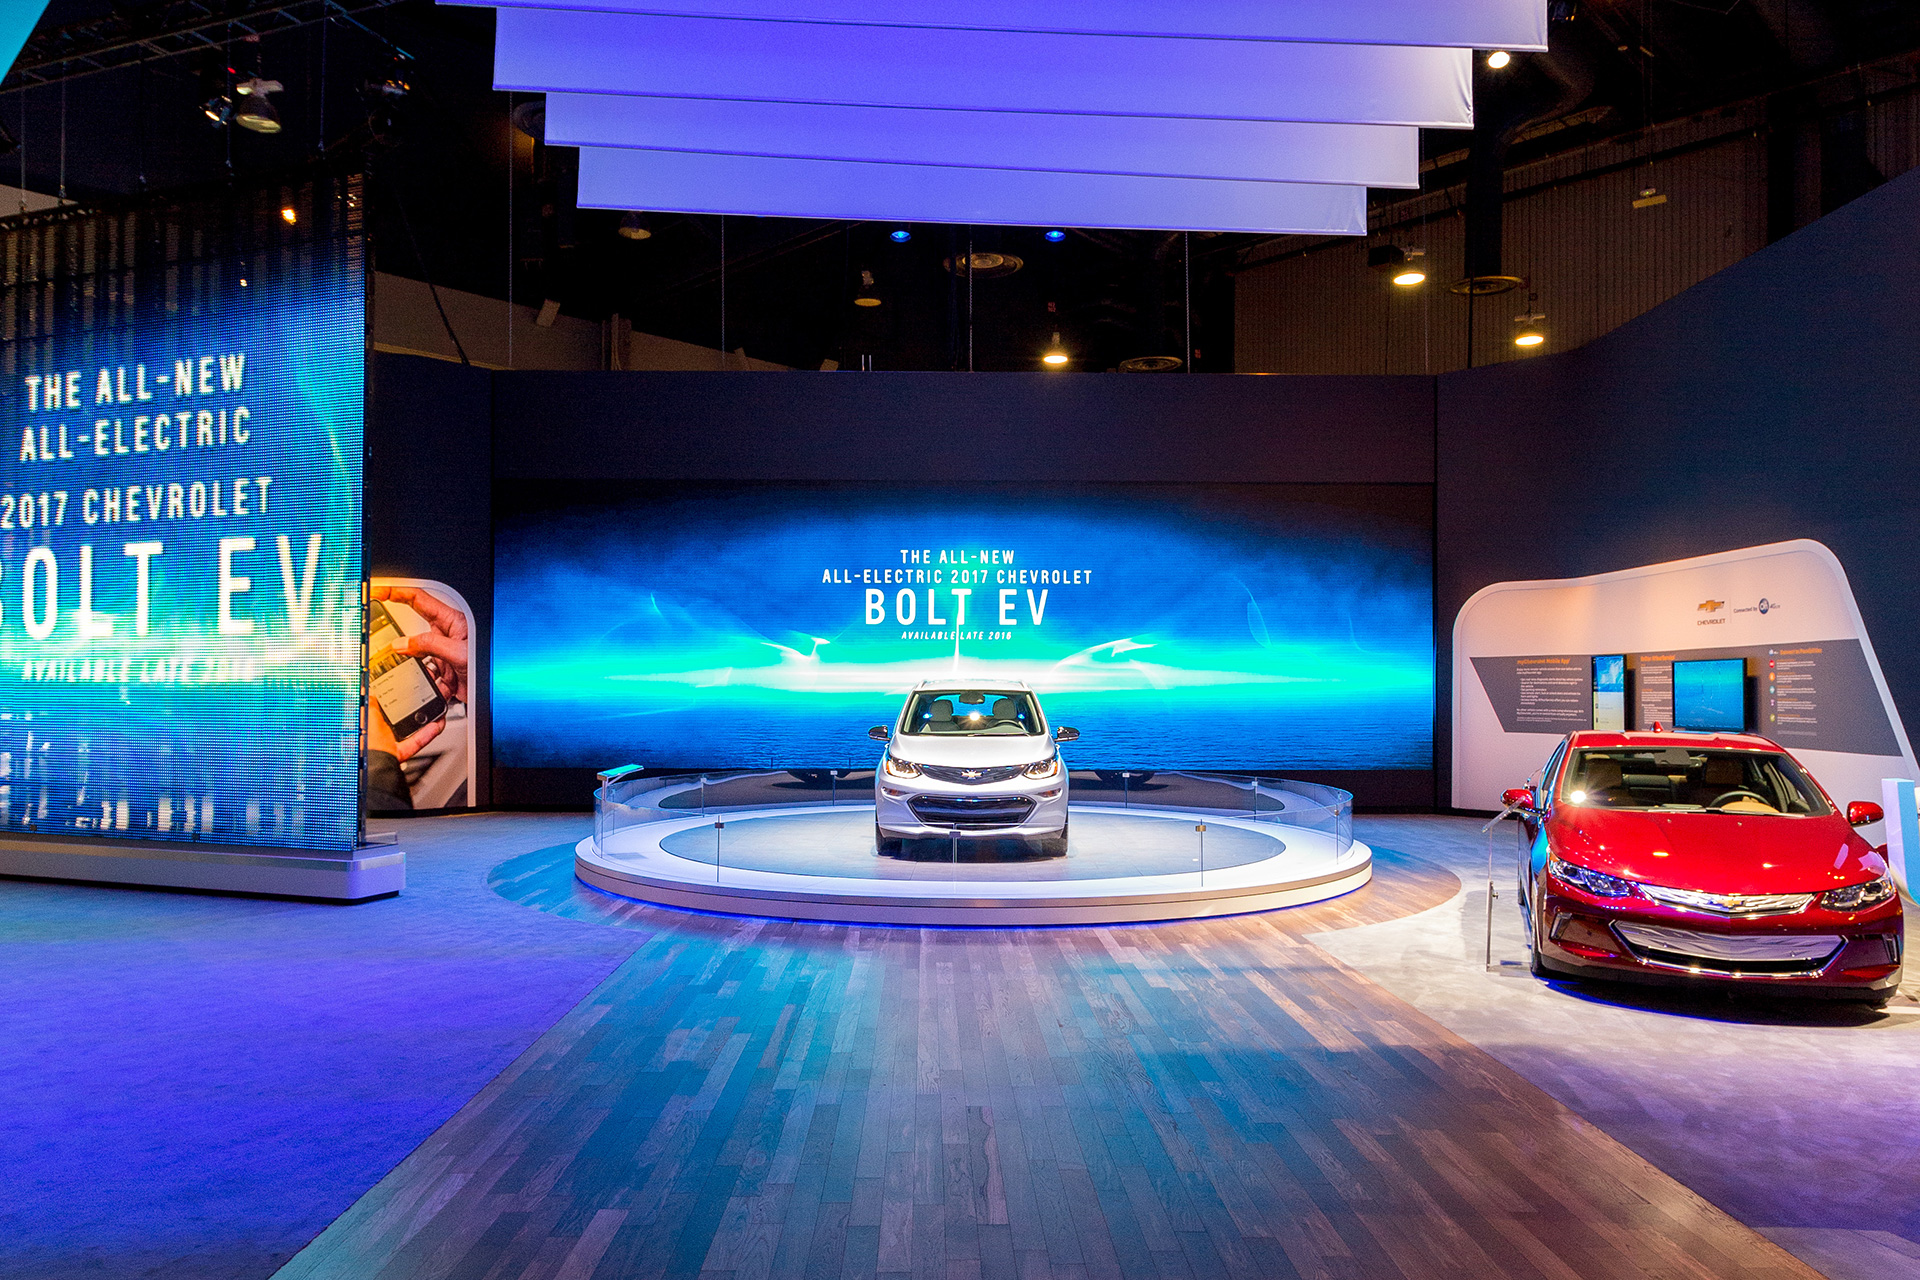 Hardwoode floor leading to a circular pedestal with a grey chevy bolt atop, a a red vehicle to the right and a video wall with ethereal imagery and text in the background.